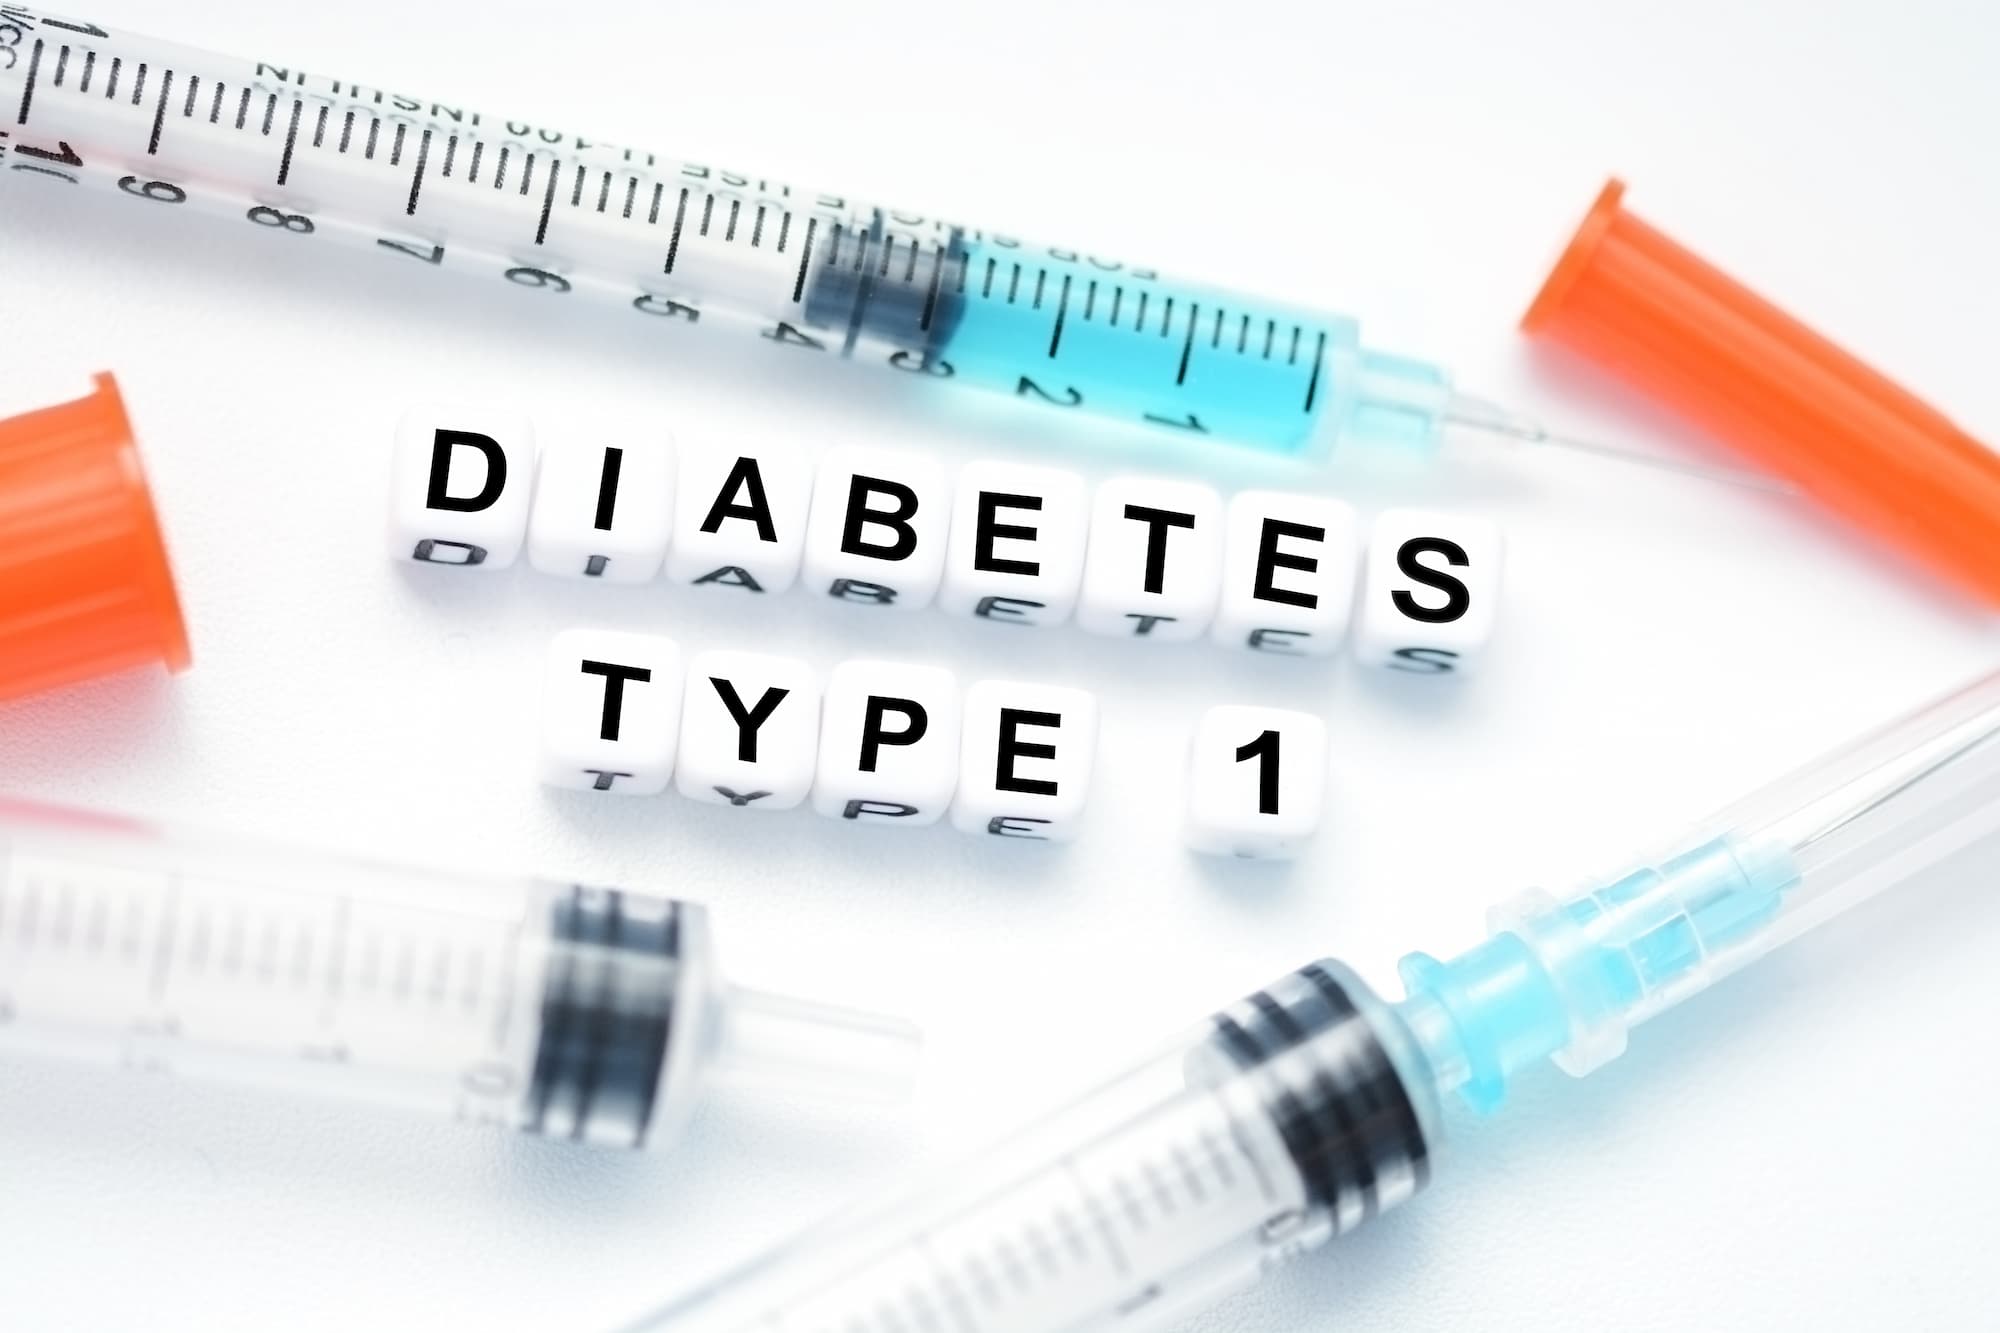 latest research type 1 diabetes